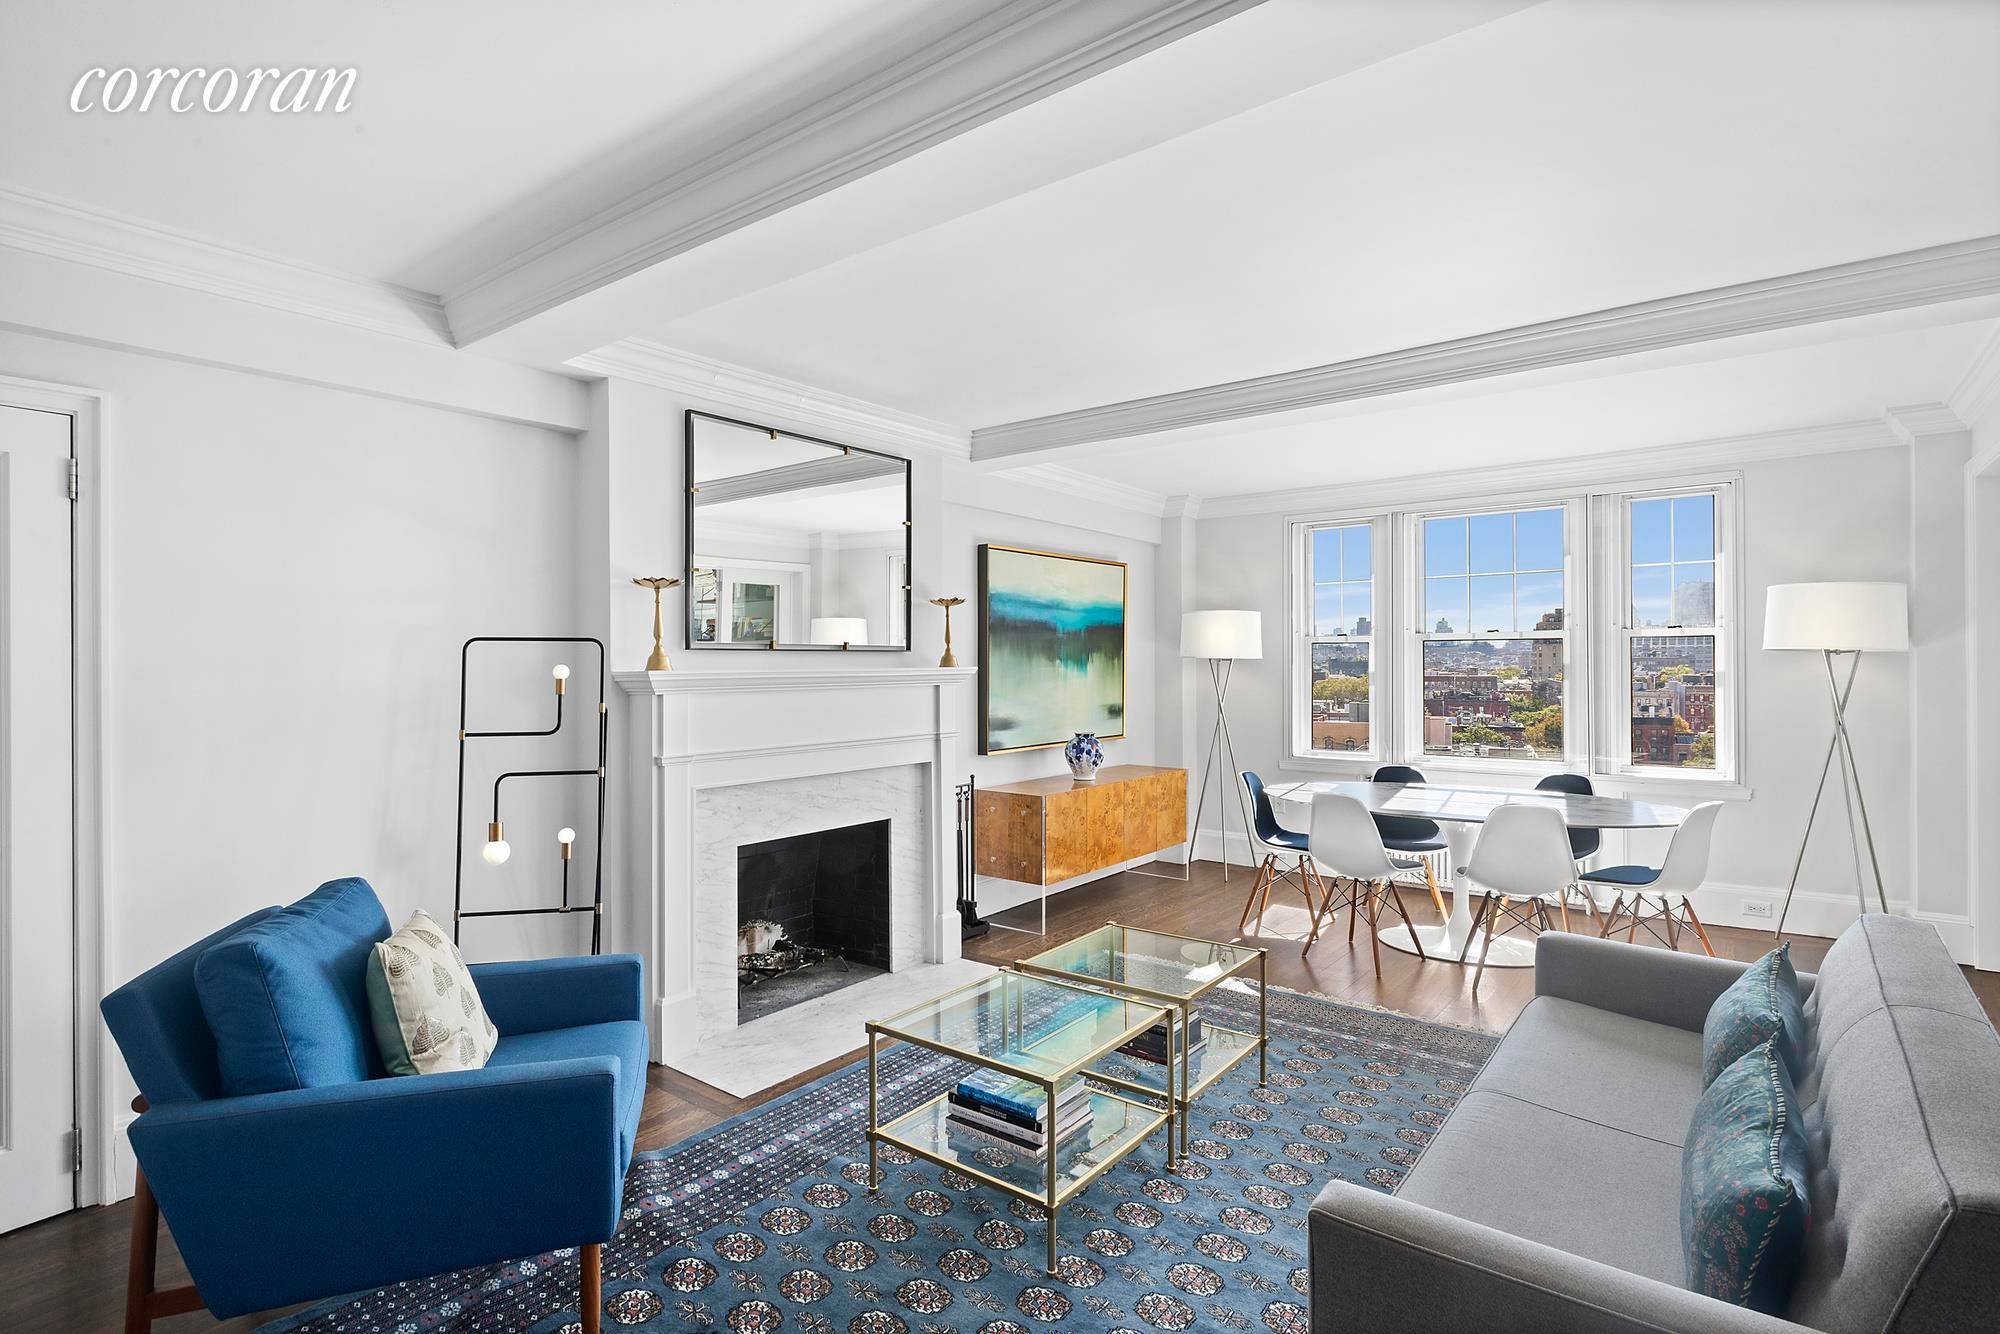 Located in the heart of the West Village, this A quintessential New YorkA Bing amp ; Bing prewar condo corner 2 bedroom and 2 bathroom home oozes charm.